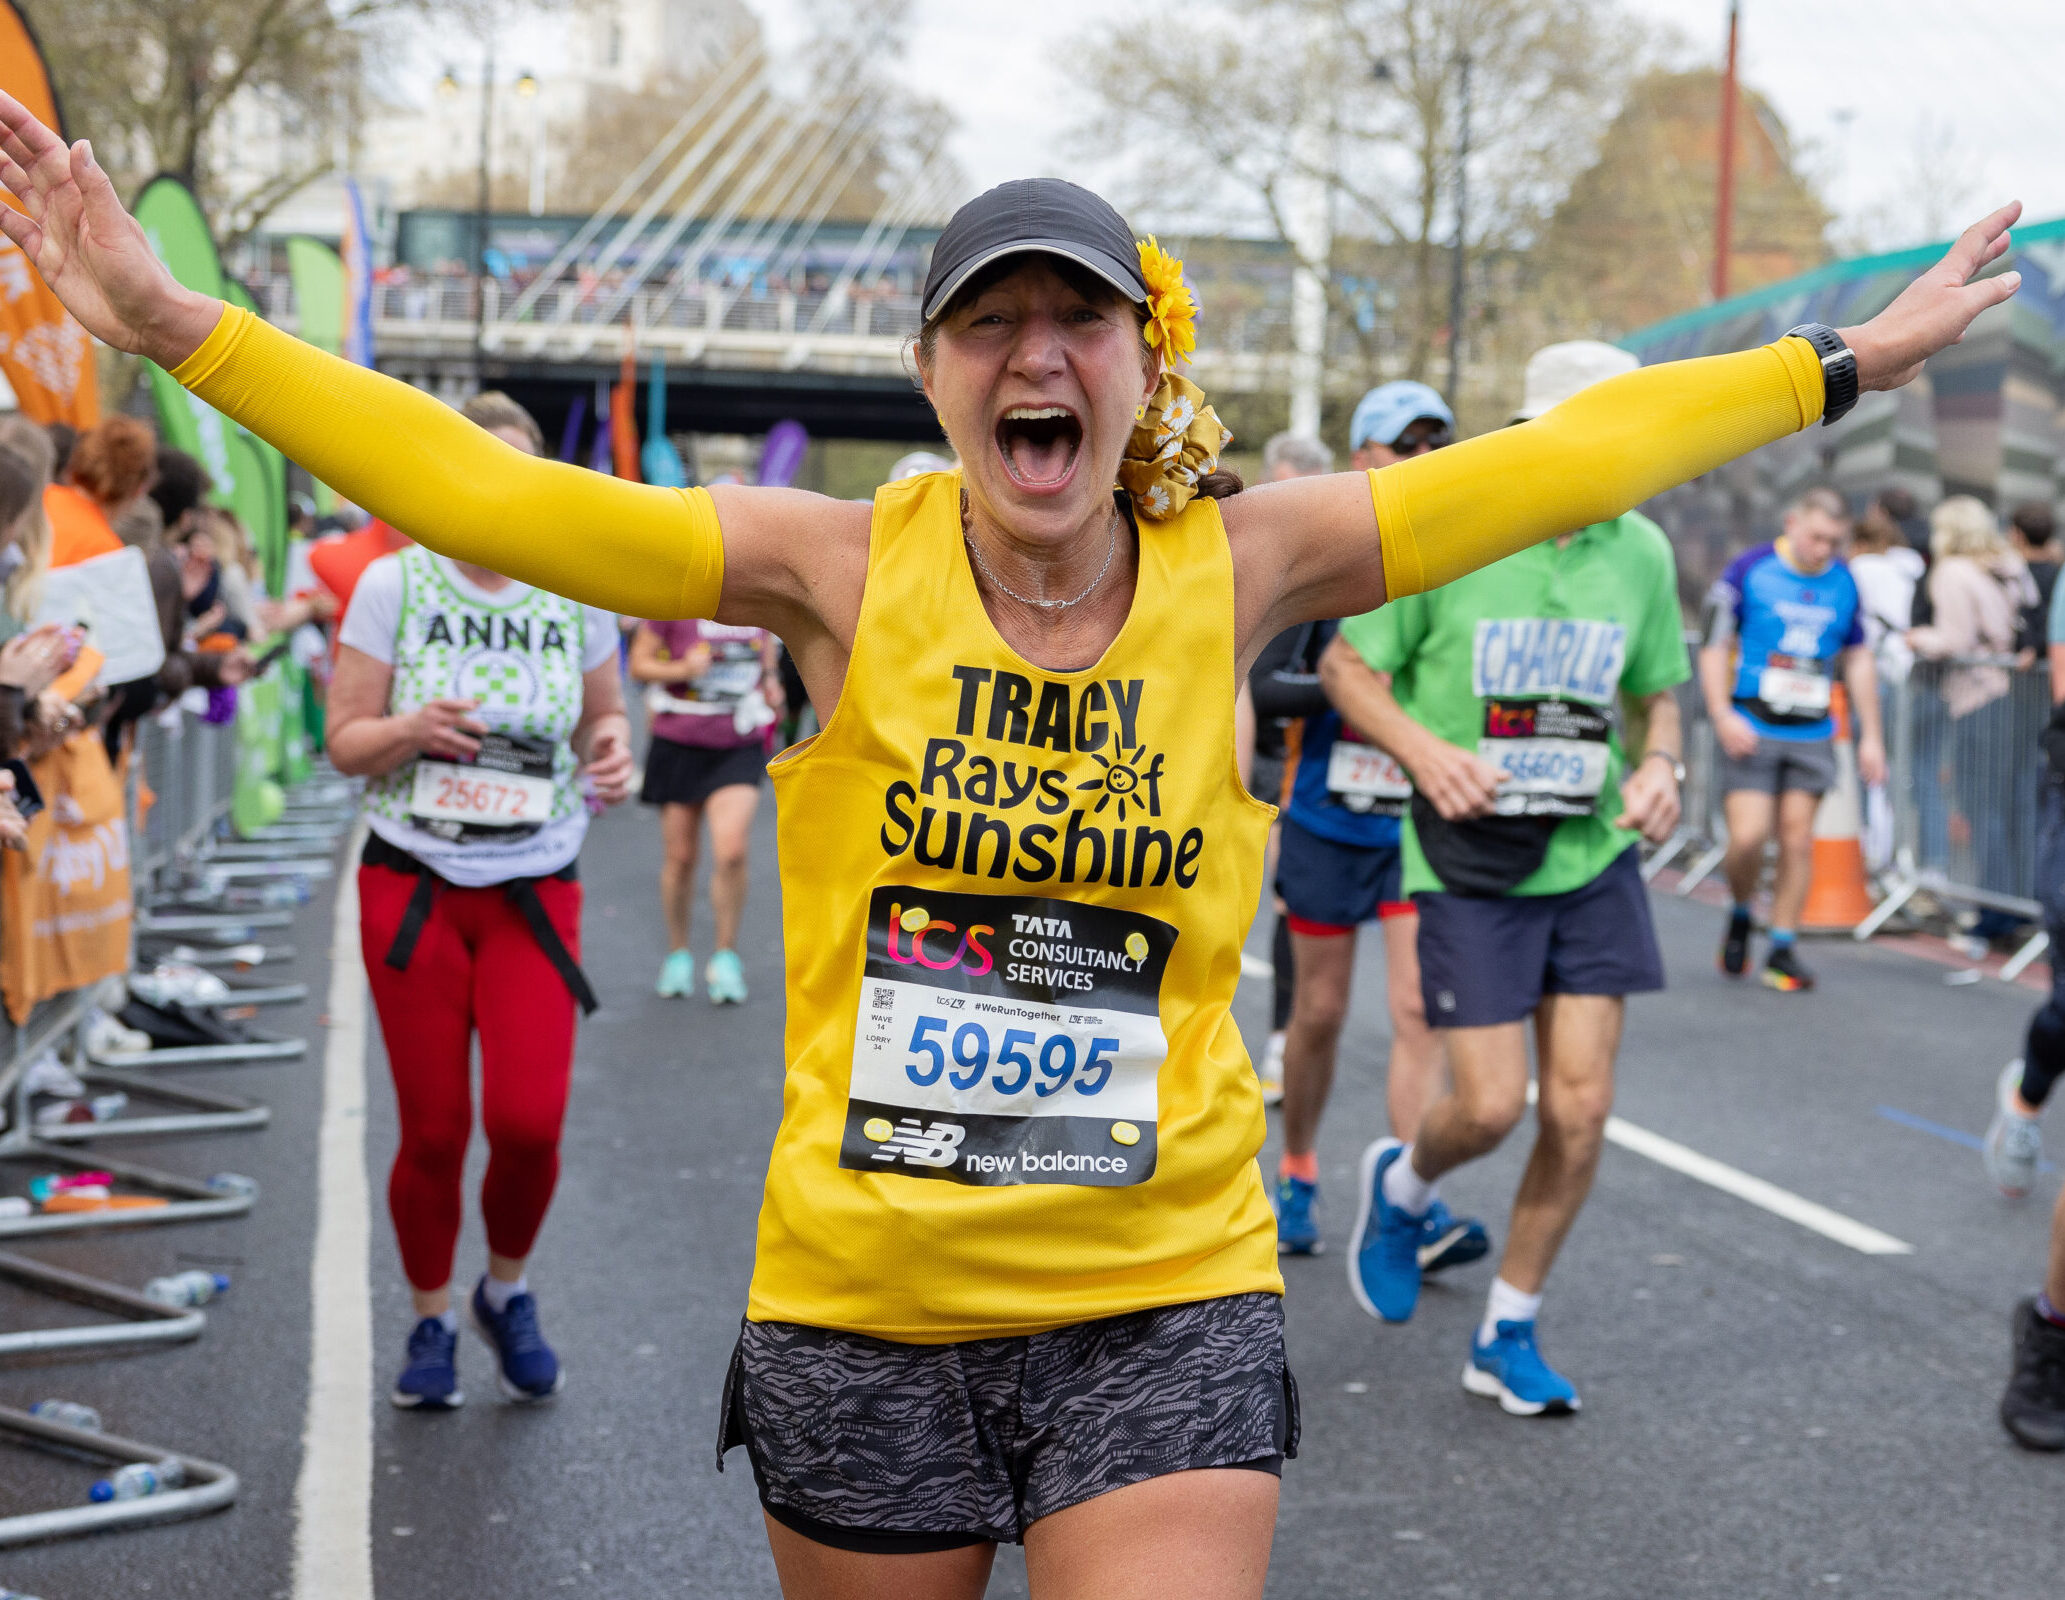 Team Sunshine London Marathon 2023 runners raise a massive £156k to help grant more magical wishes for seriously ill children